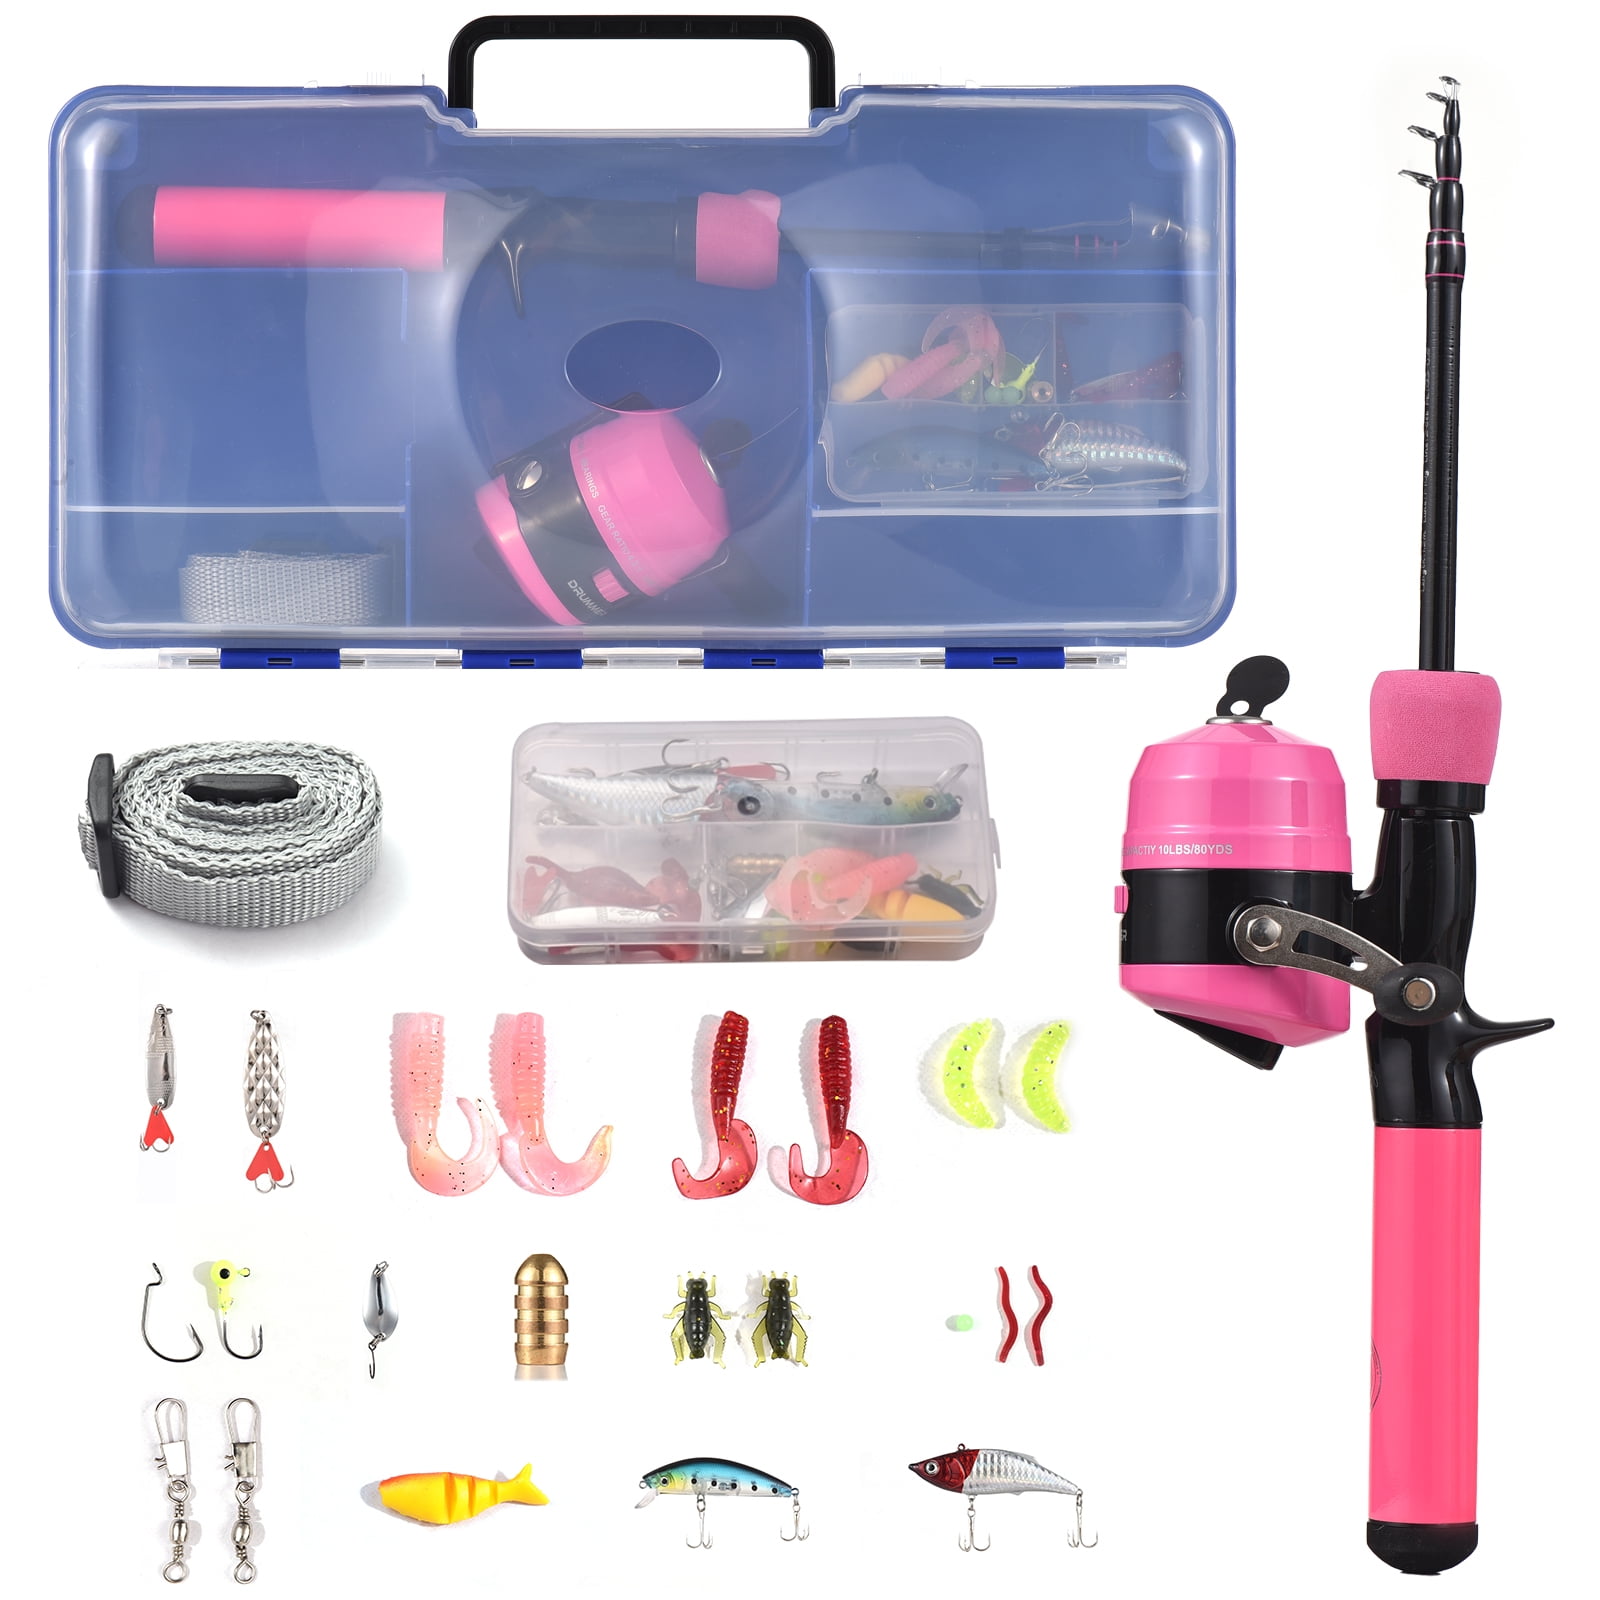 Lixada Kids Fishing Pole Kit, 47'' Telescopic Rod and Reel Beginner Combo  with Spincast Reel,Tackle Box,Fishing Gear Gifts for Boys,Girls, Toddler,Youth  